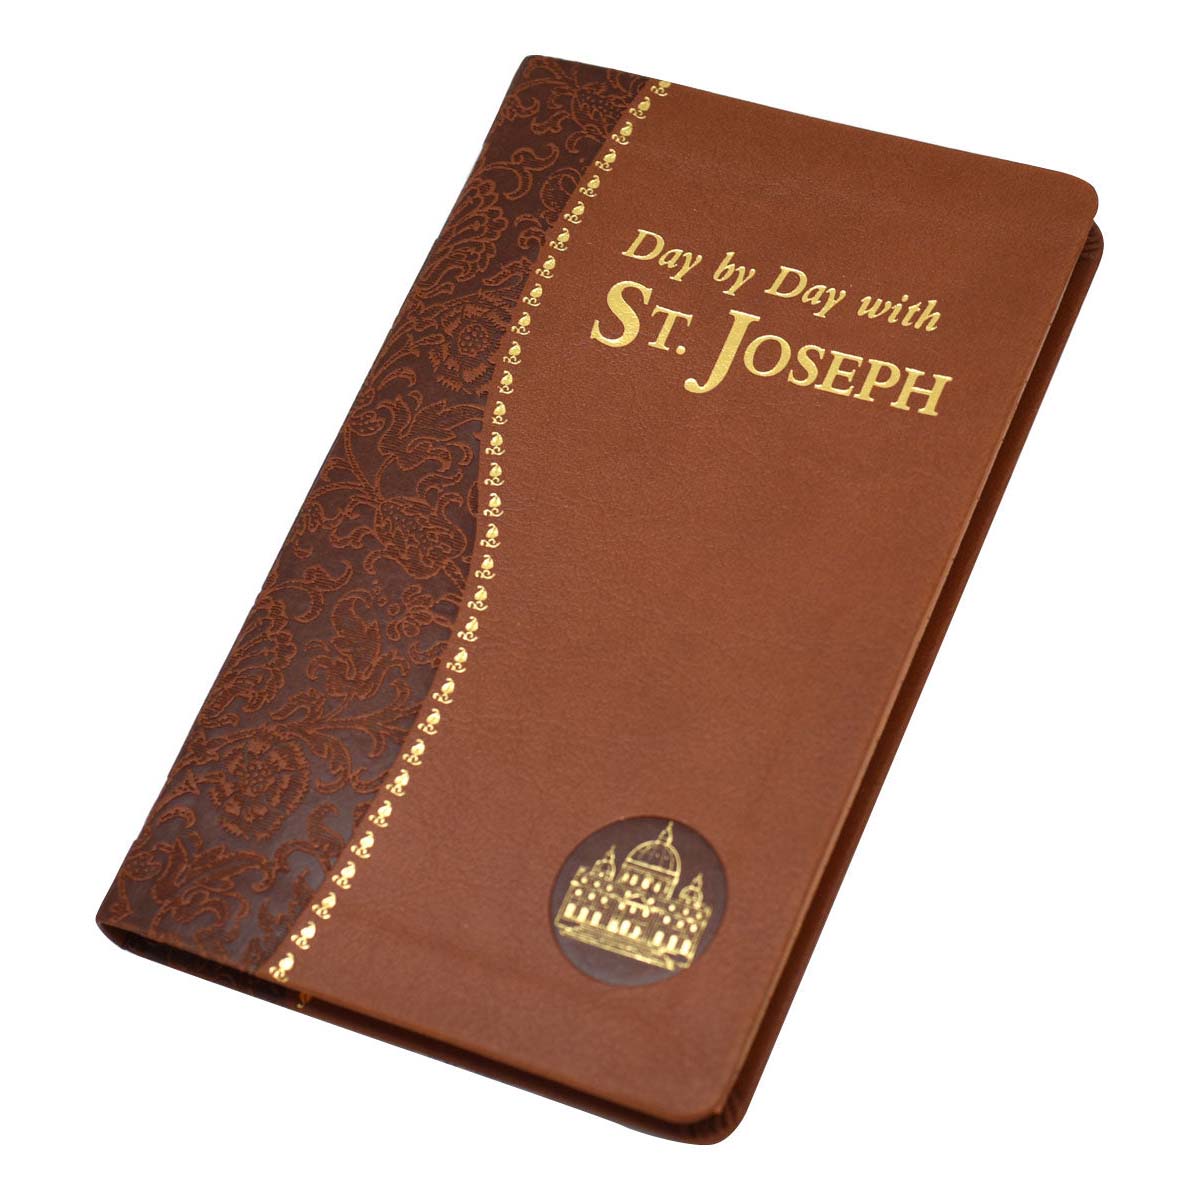 Day By Day with St. Joseph Book with KofC Logo